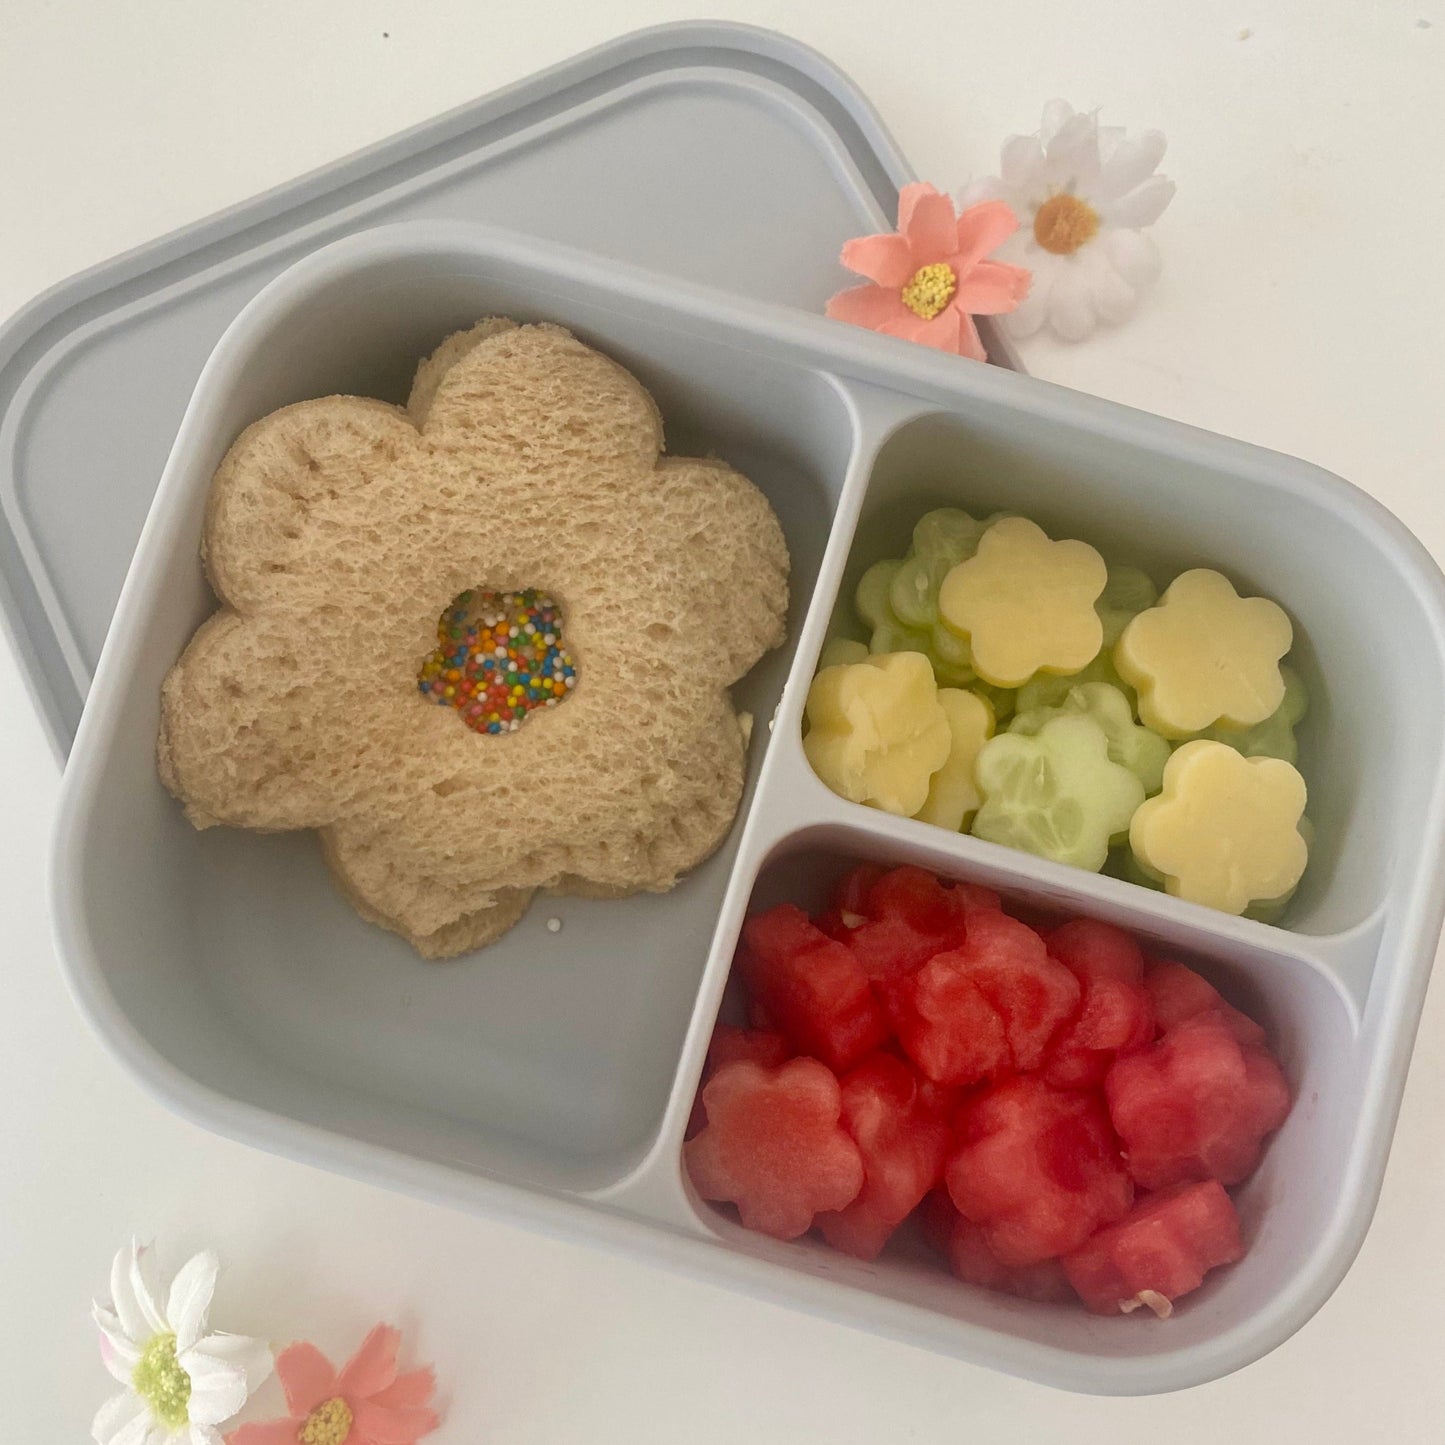 Silicone 3 Bento Lunchbox